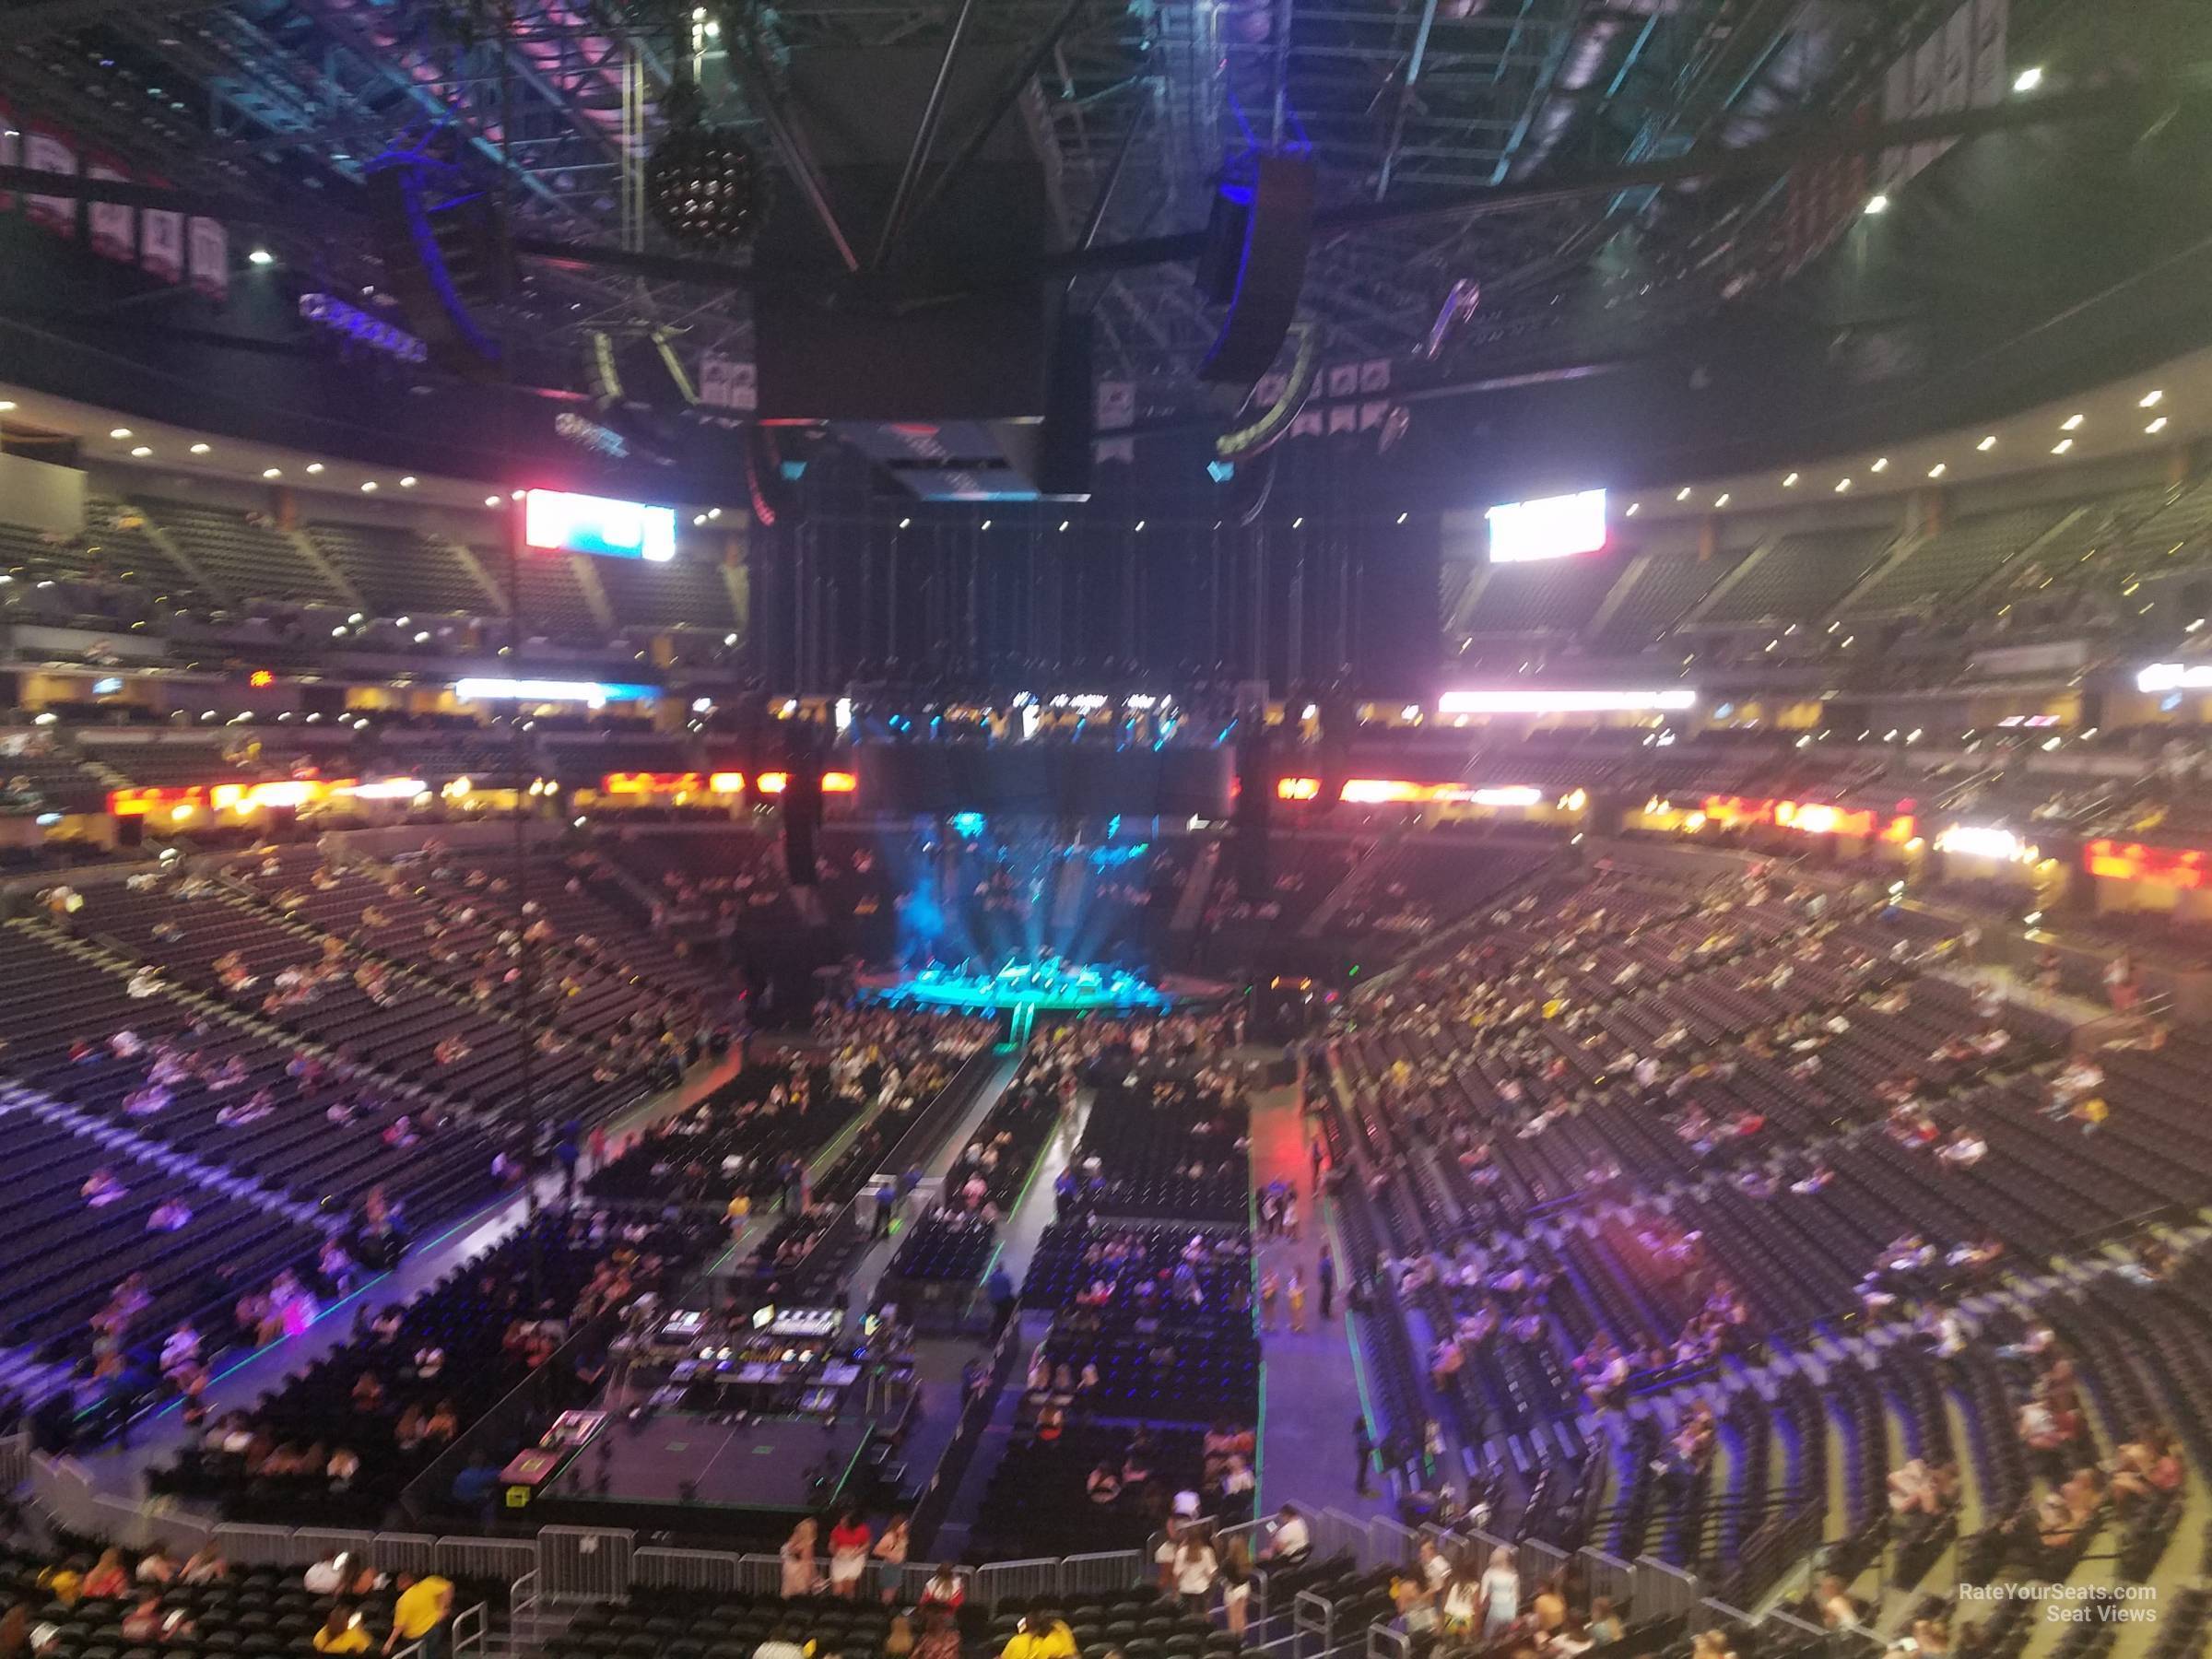 section 214, row 4 seat view  for concert - ball arena